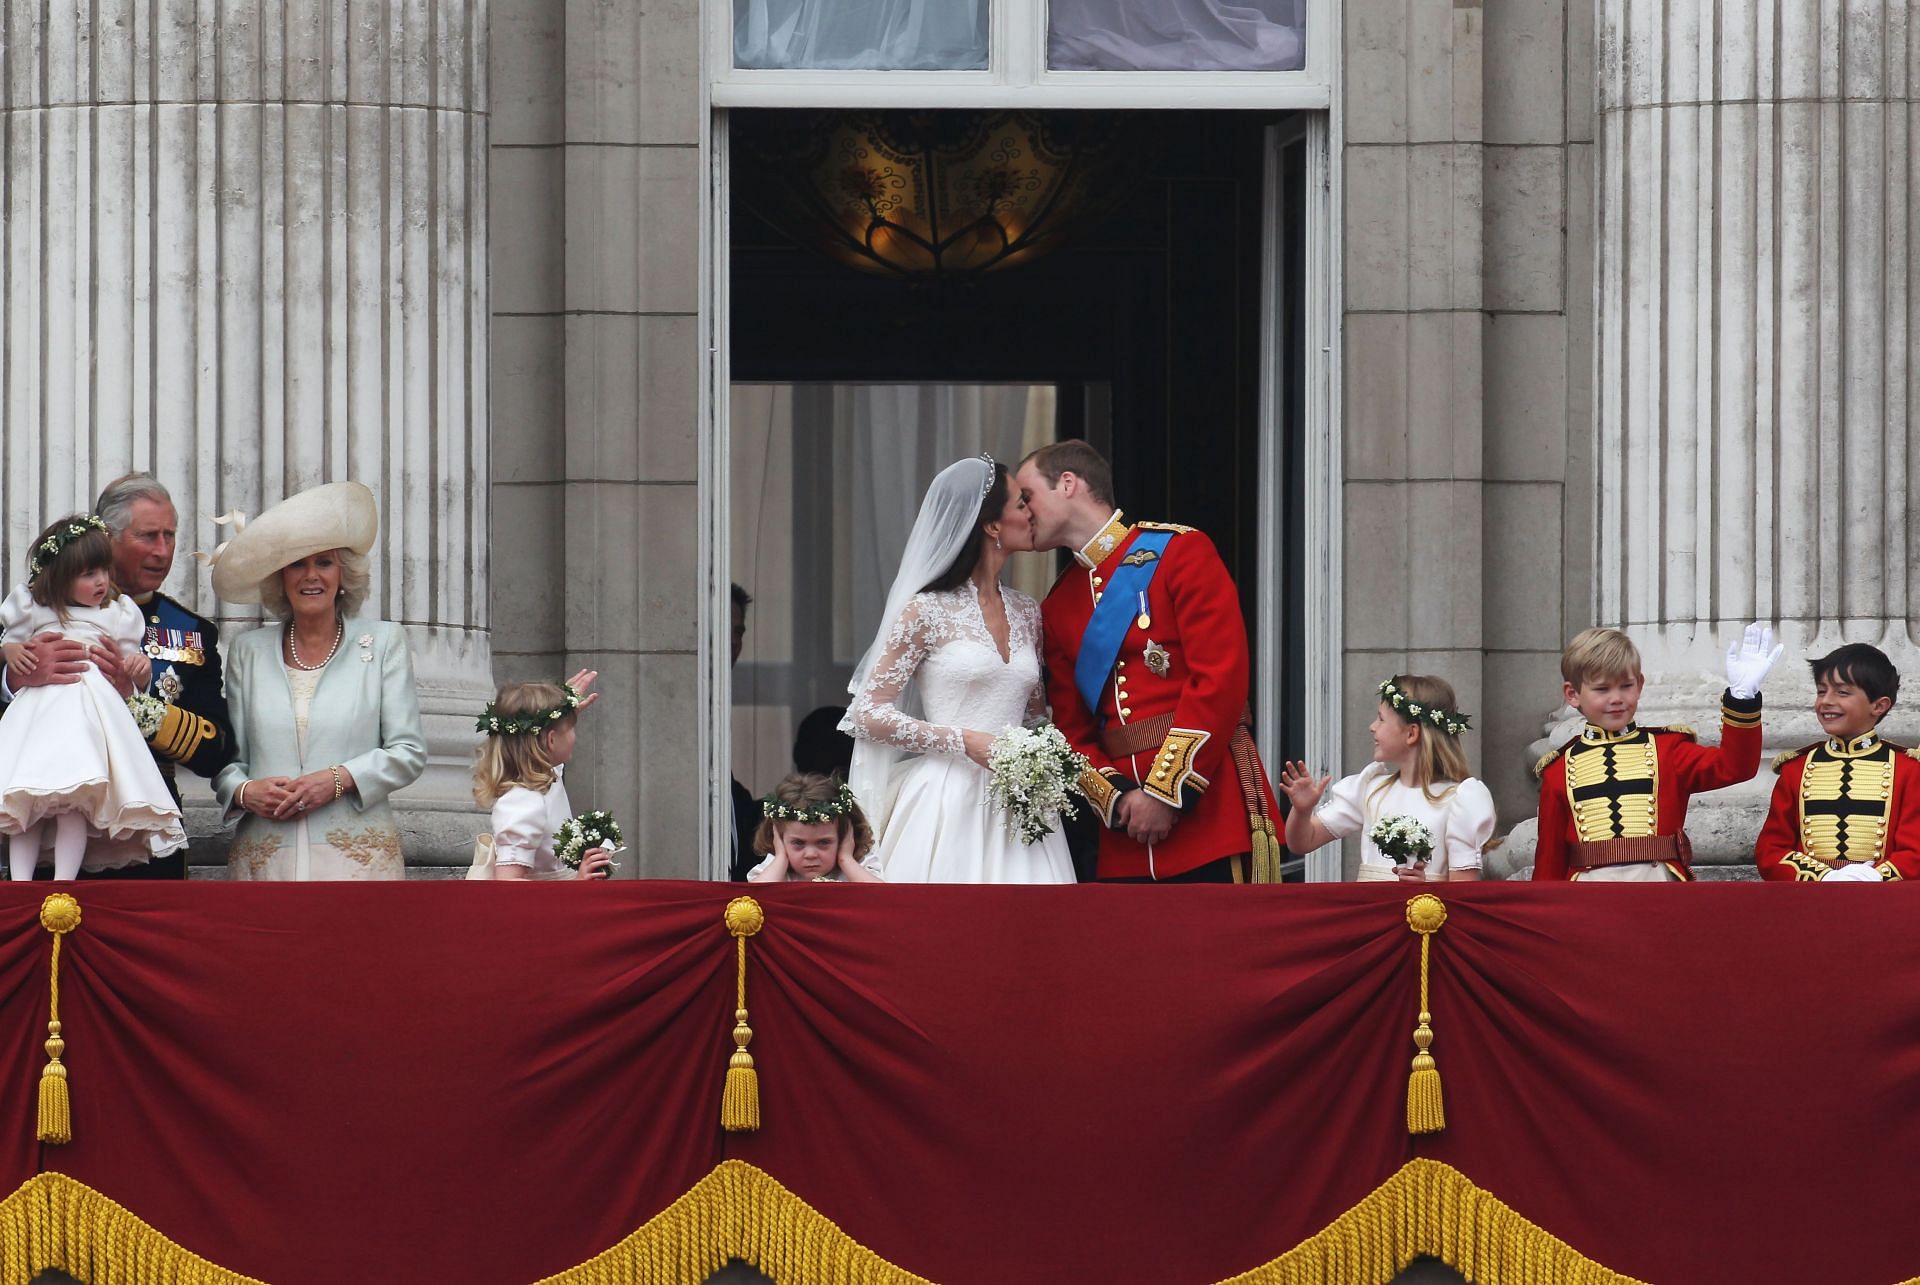 Prince William, Duke of Cambridge and Catherine, Duchess of Cambridge, kiss on the balcony at Buckingham Palace (Source: Getty)